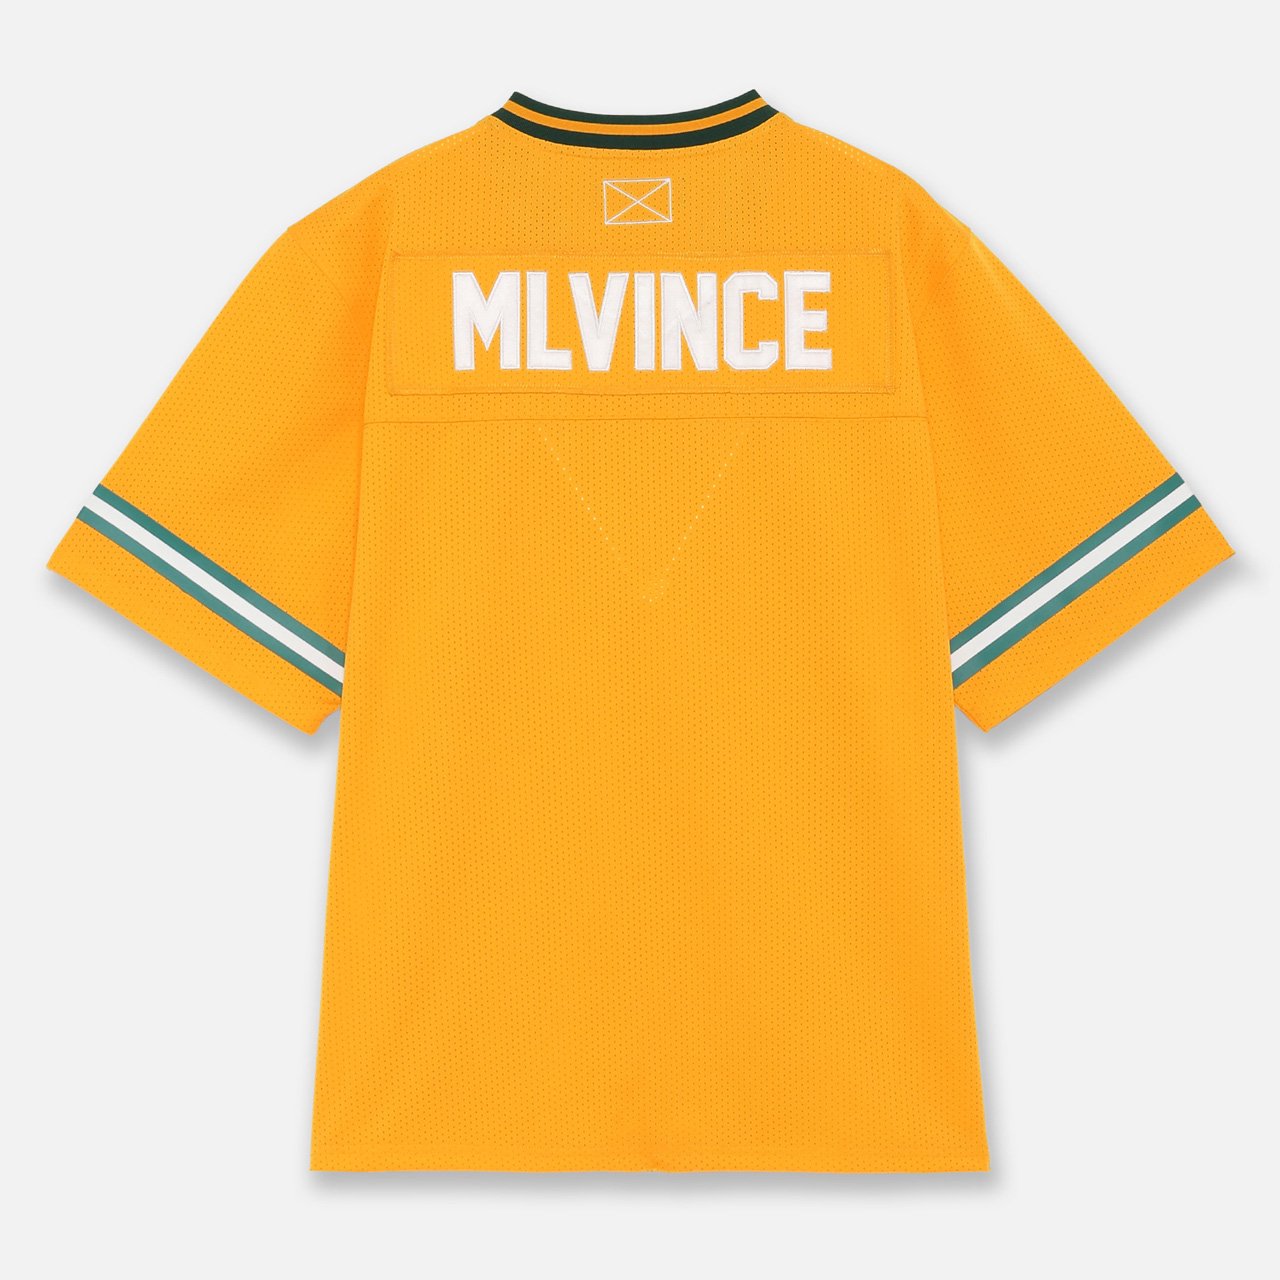 <img class='new_mark_img1' src='https://img.shop-pro.jp/img/new/icons5.gif' style='border:none;display:inline;margin:0px;padding:0px;width:auto;' />MLVINCE () | S/S FOOTBALL SHIRT YELLOW